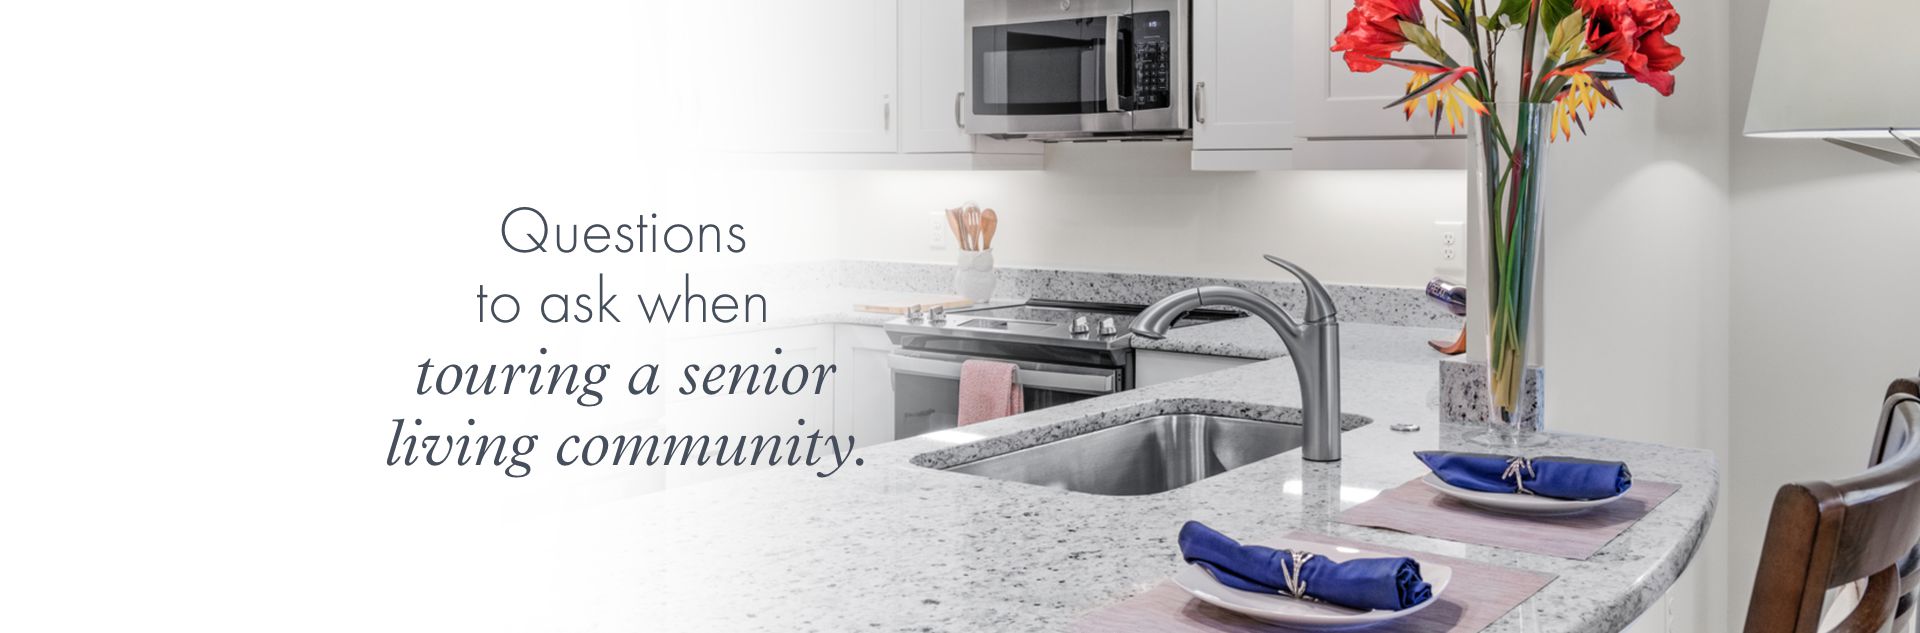 Questions to ask when touring a senior living community.